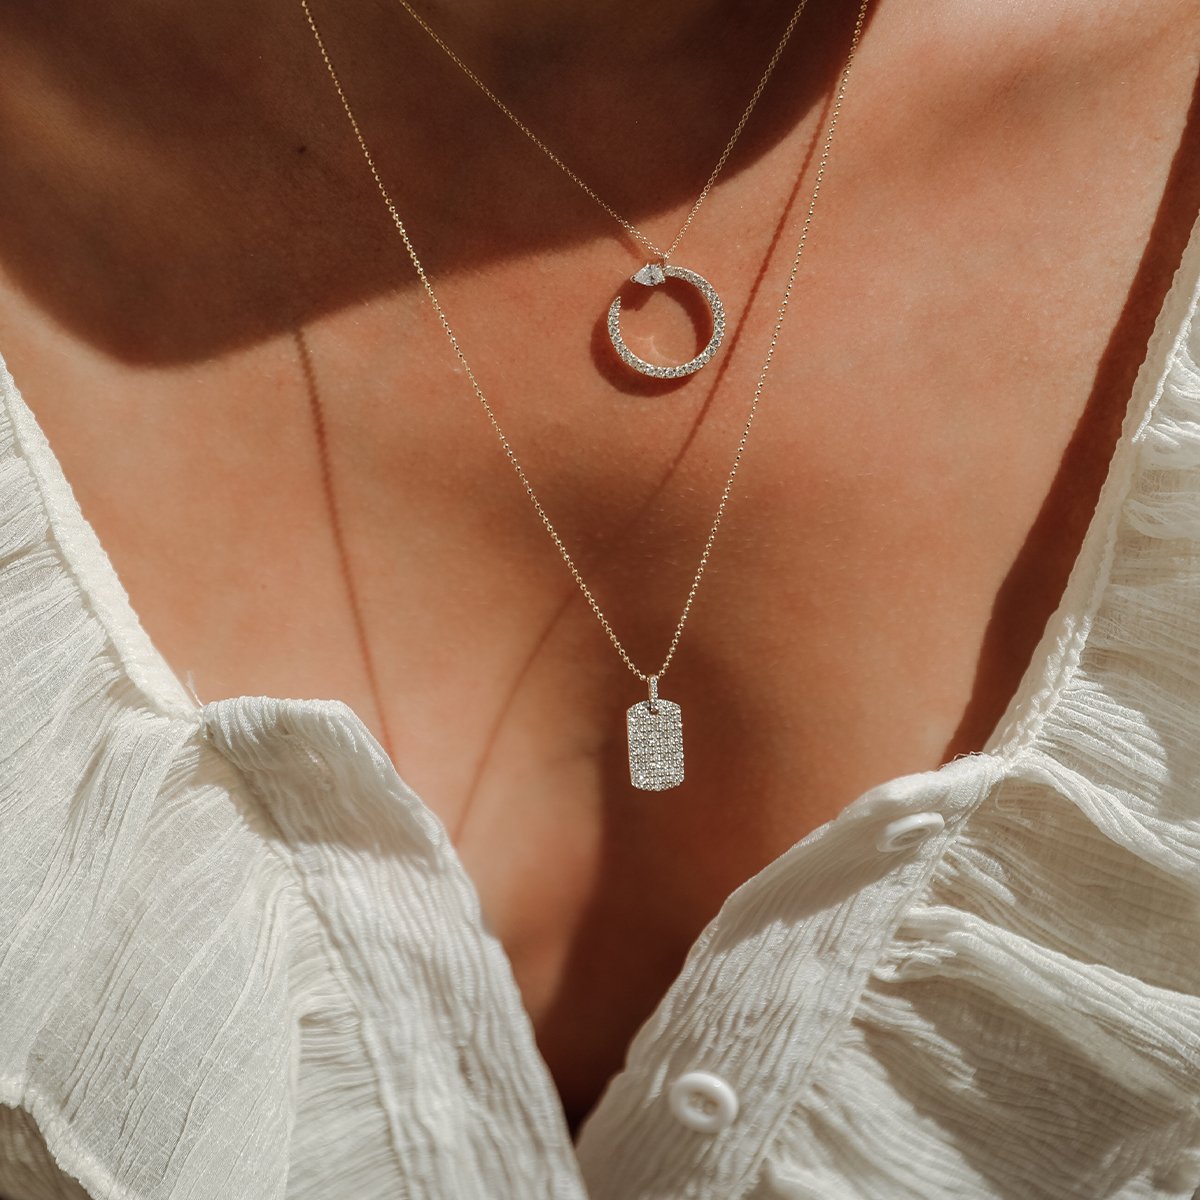 The Diamond Dogtag shown beautifully layered with our Serpent Necklace.